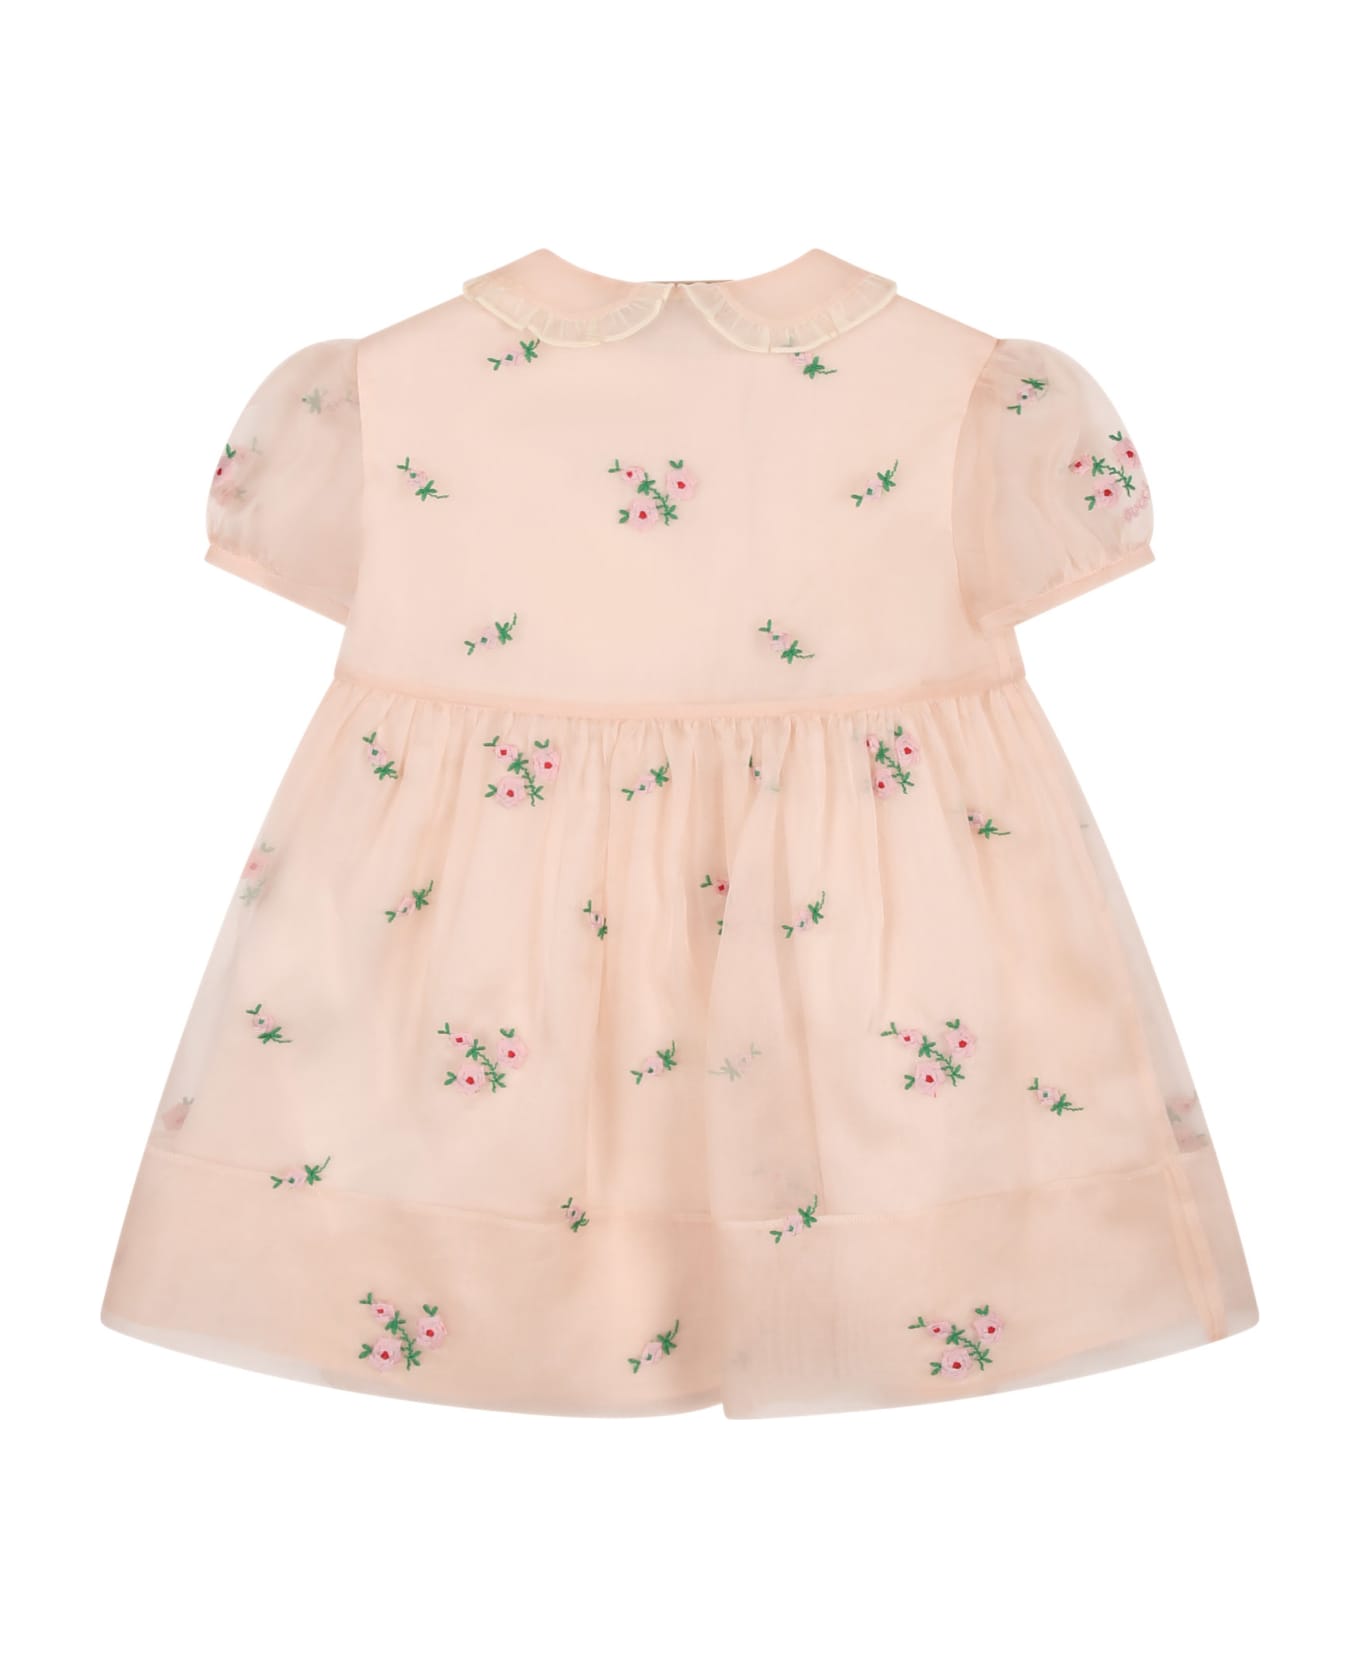 Gucci Pink Dress For Baby Girl With All-over Embroidered Roses - Pink ウェア